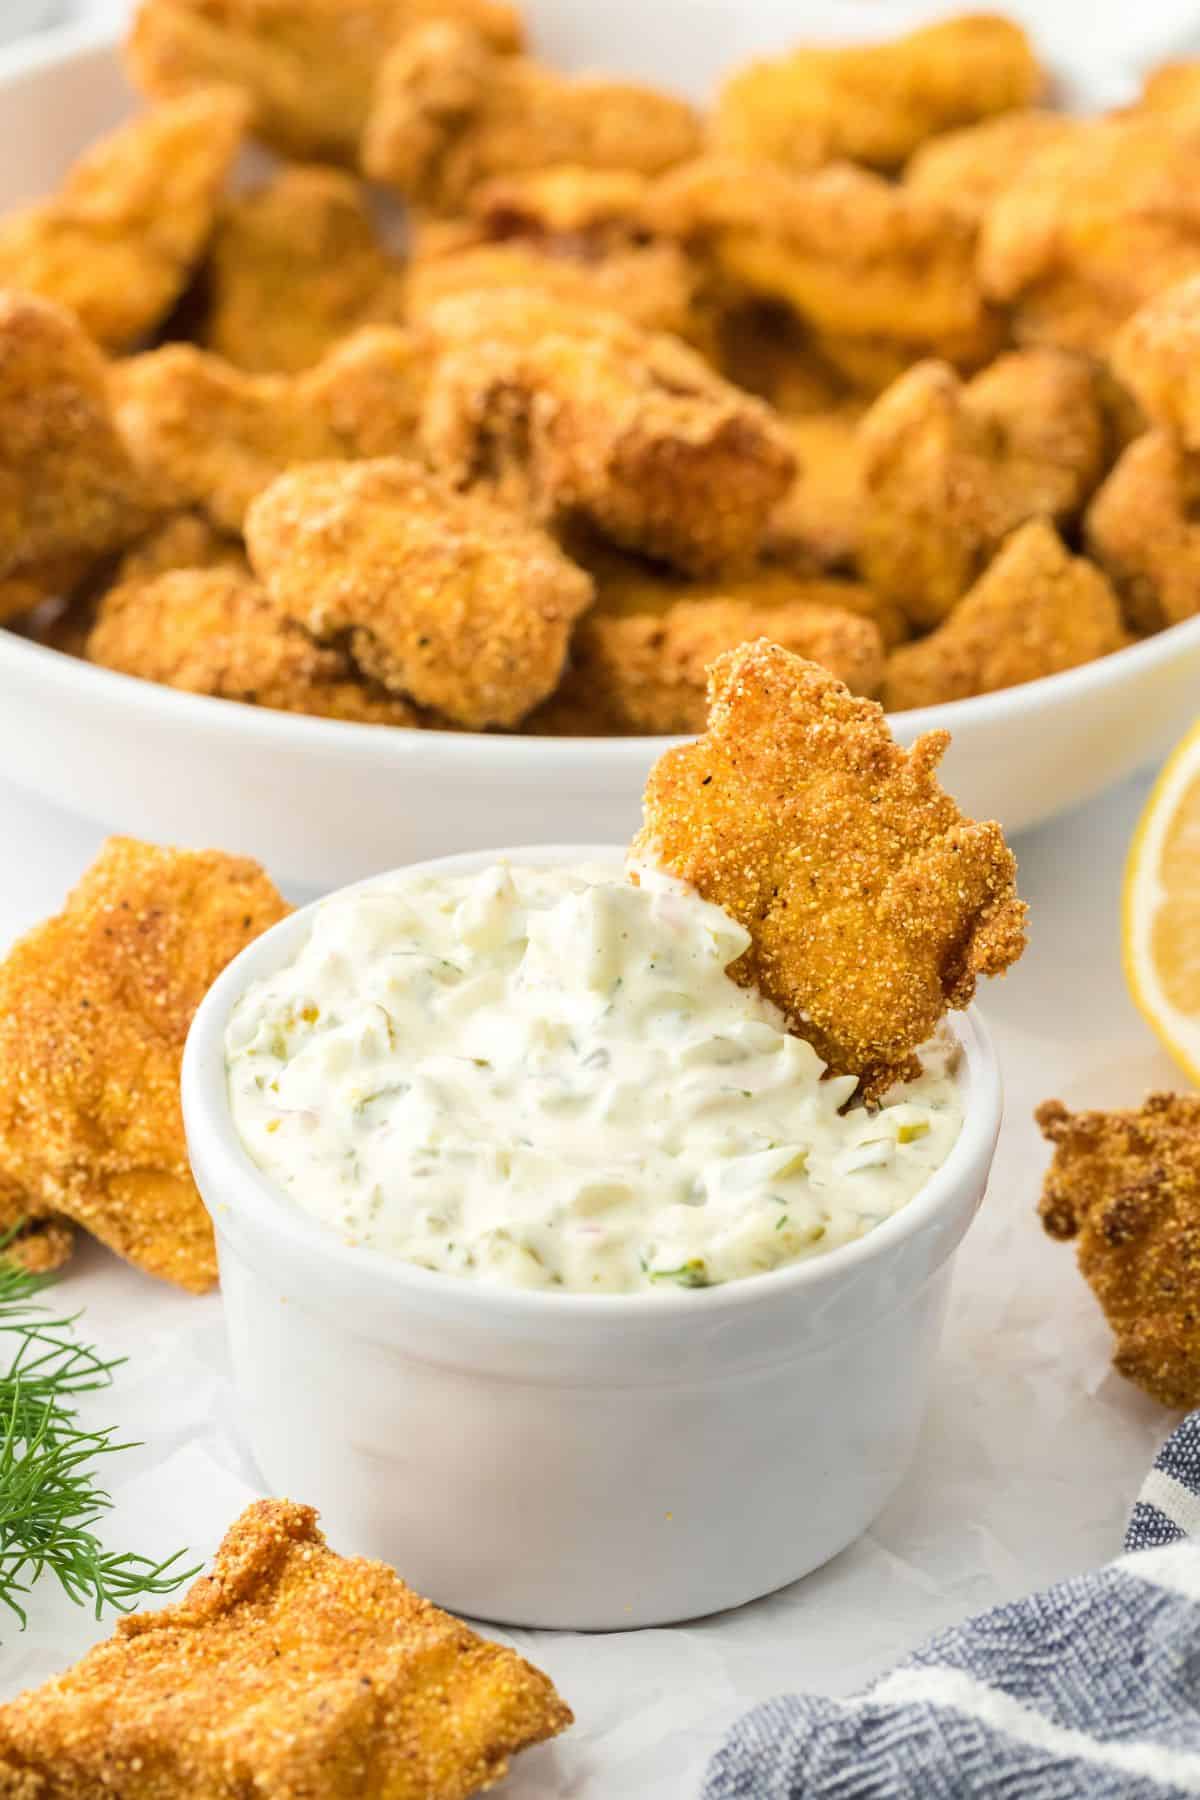 A catfish nugget dipped in a ramekin with tartar sauce, with more nuggets surrounding it and more nuggets in the background in a bowl